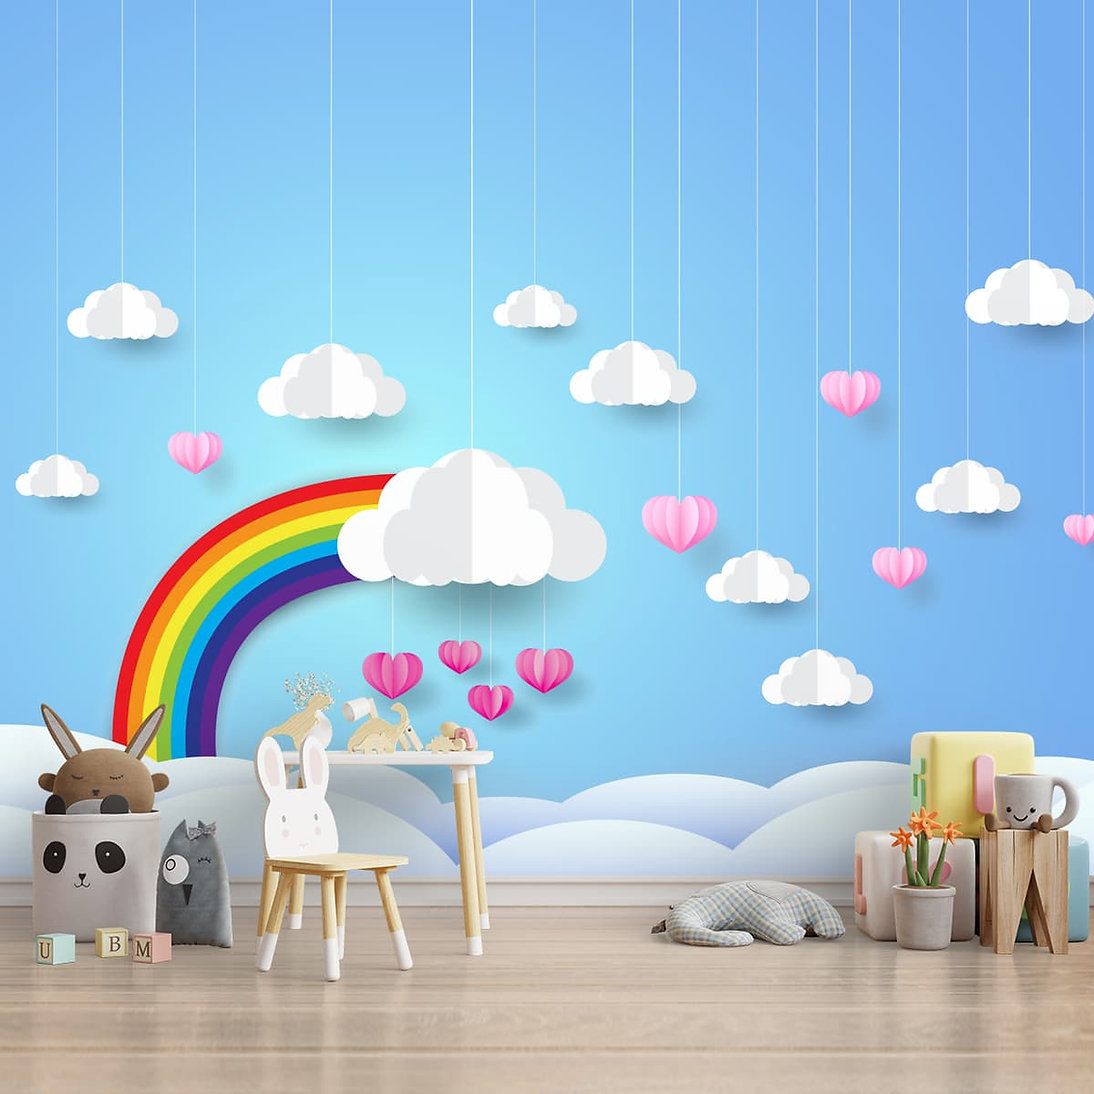 wallpaper in a kids room of blue sky with clouds and rainbow